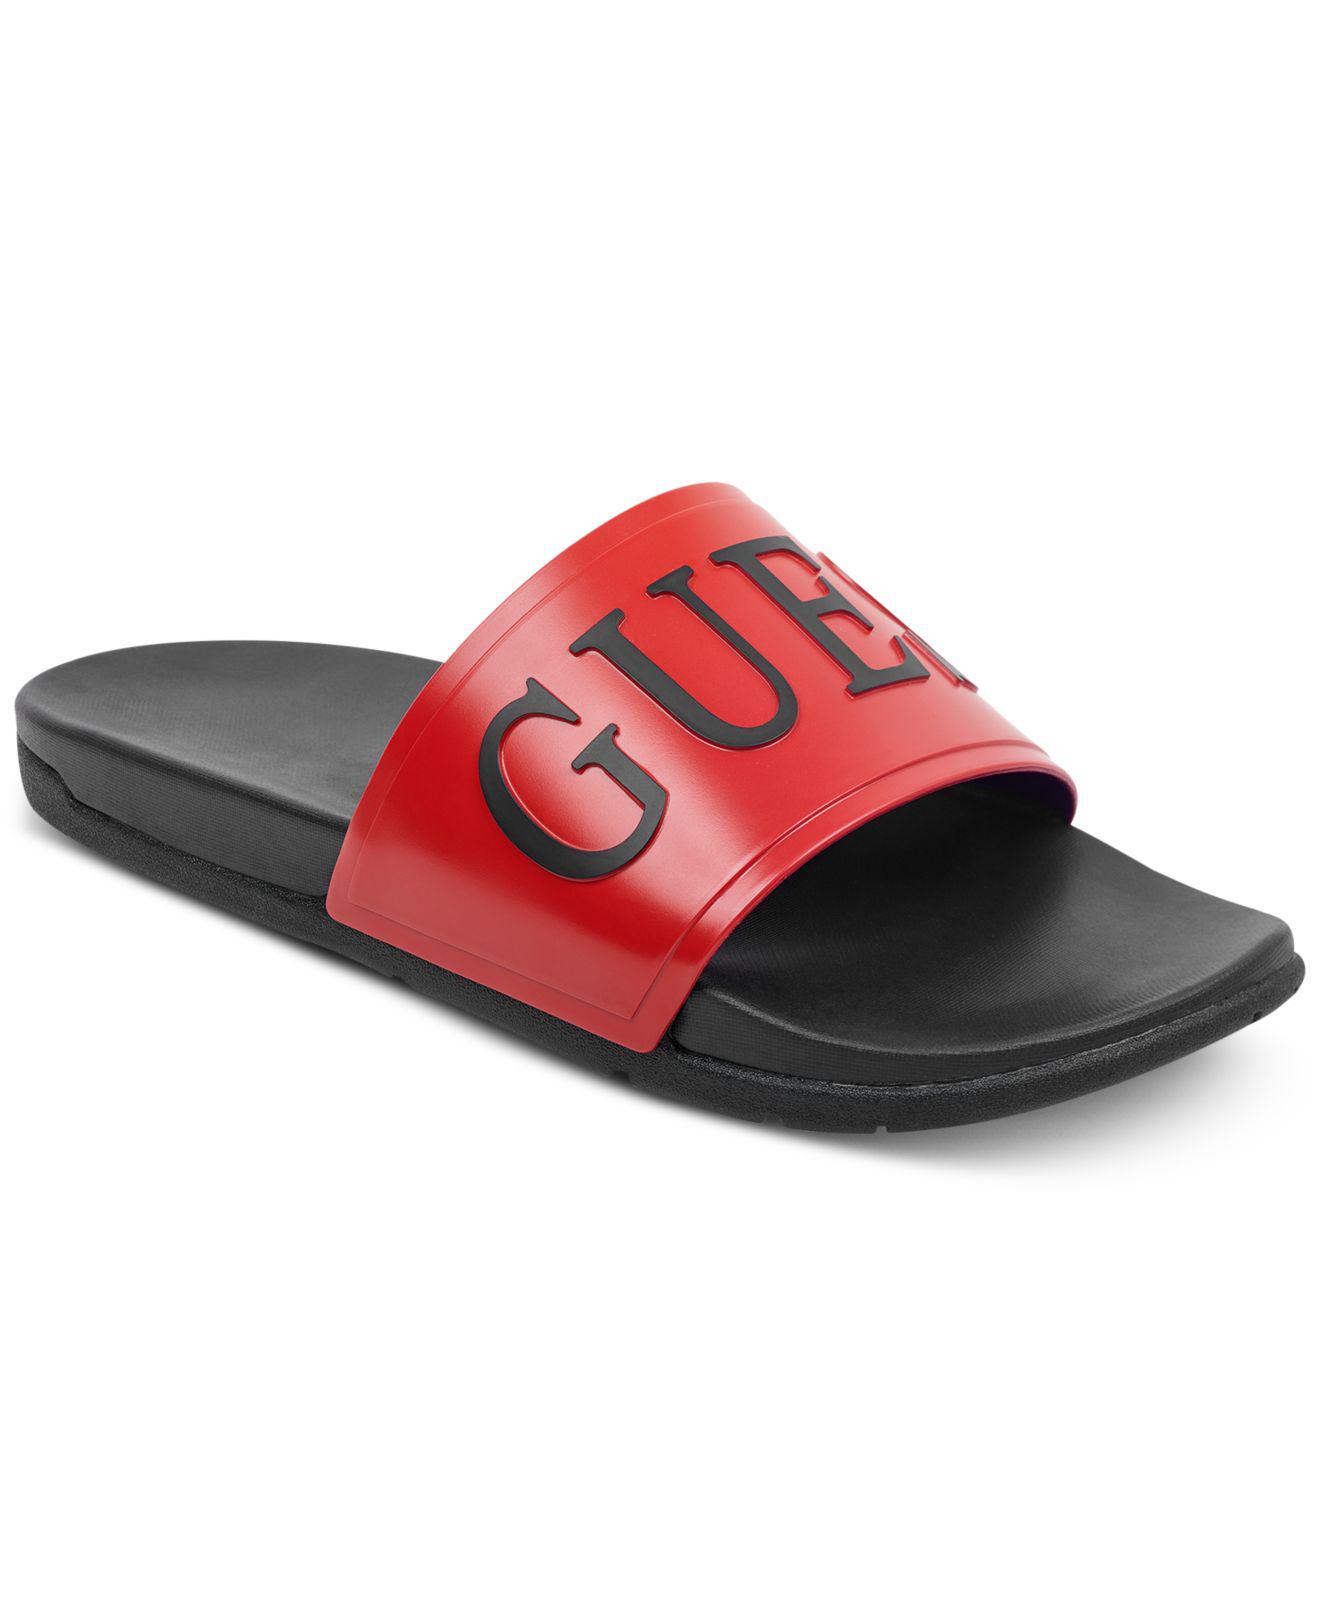 Guess Delfino Soccer Slides in Red 